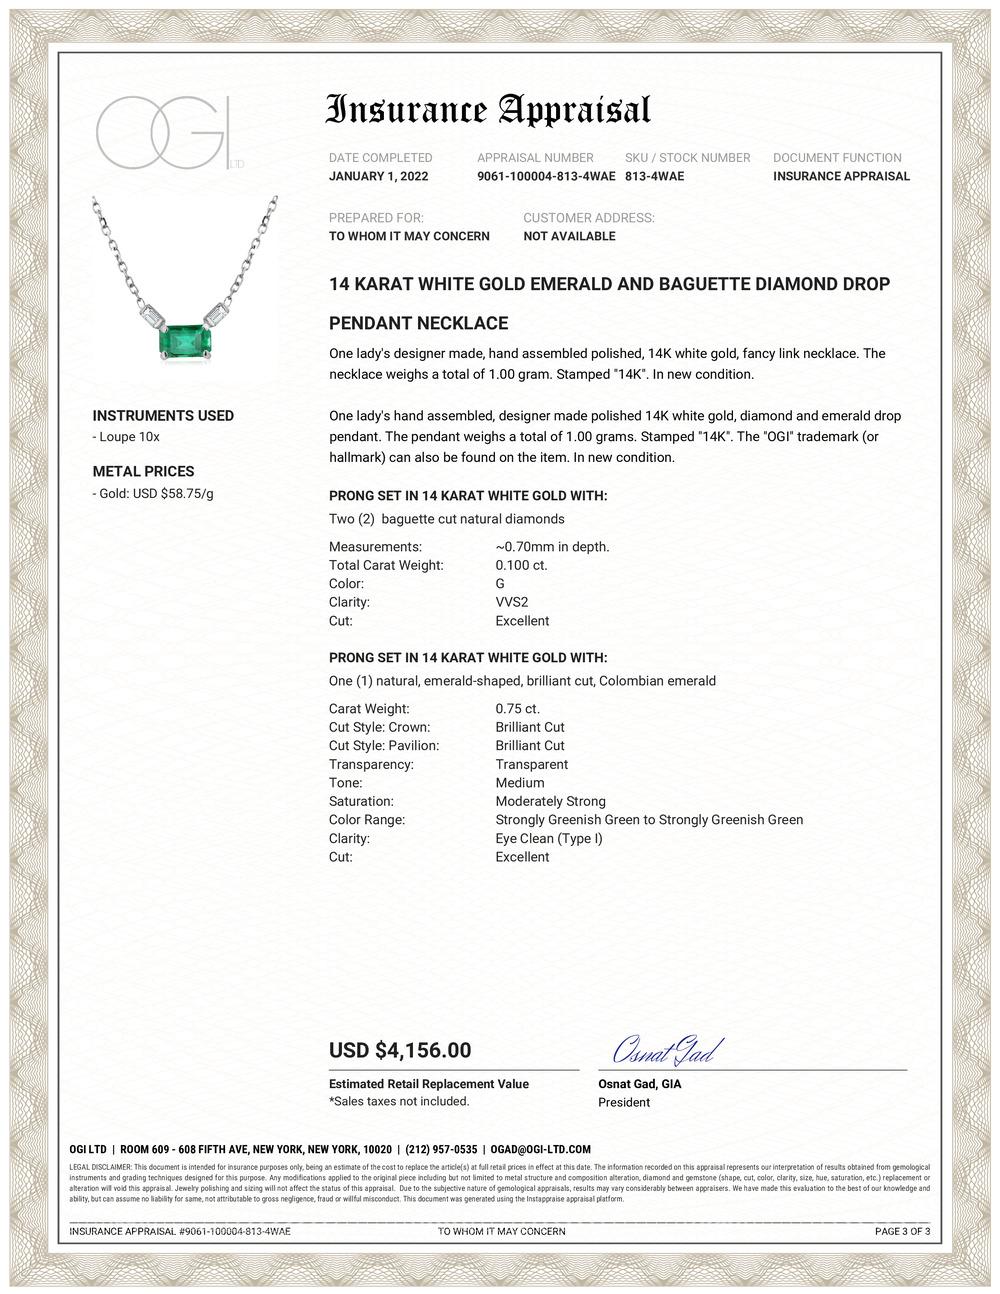 Fourteen karats white gold necklace pendant 
Necklace measuring 16 inches long
One emerald cut Colombia emeralds weighing 0.76 carats
Two baguette shaped diamonds weighing 0.12 carats
Cable chain necklace with a lobster spring clasp
Trending style